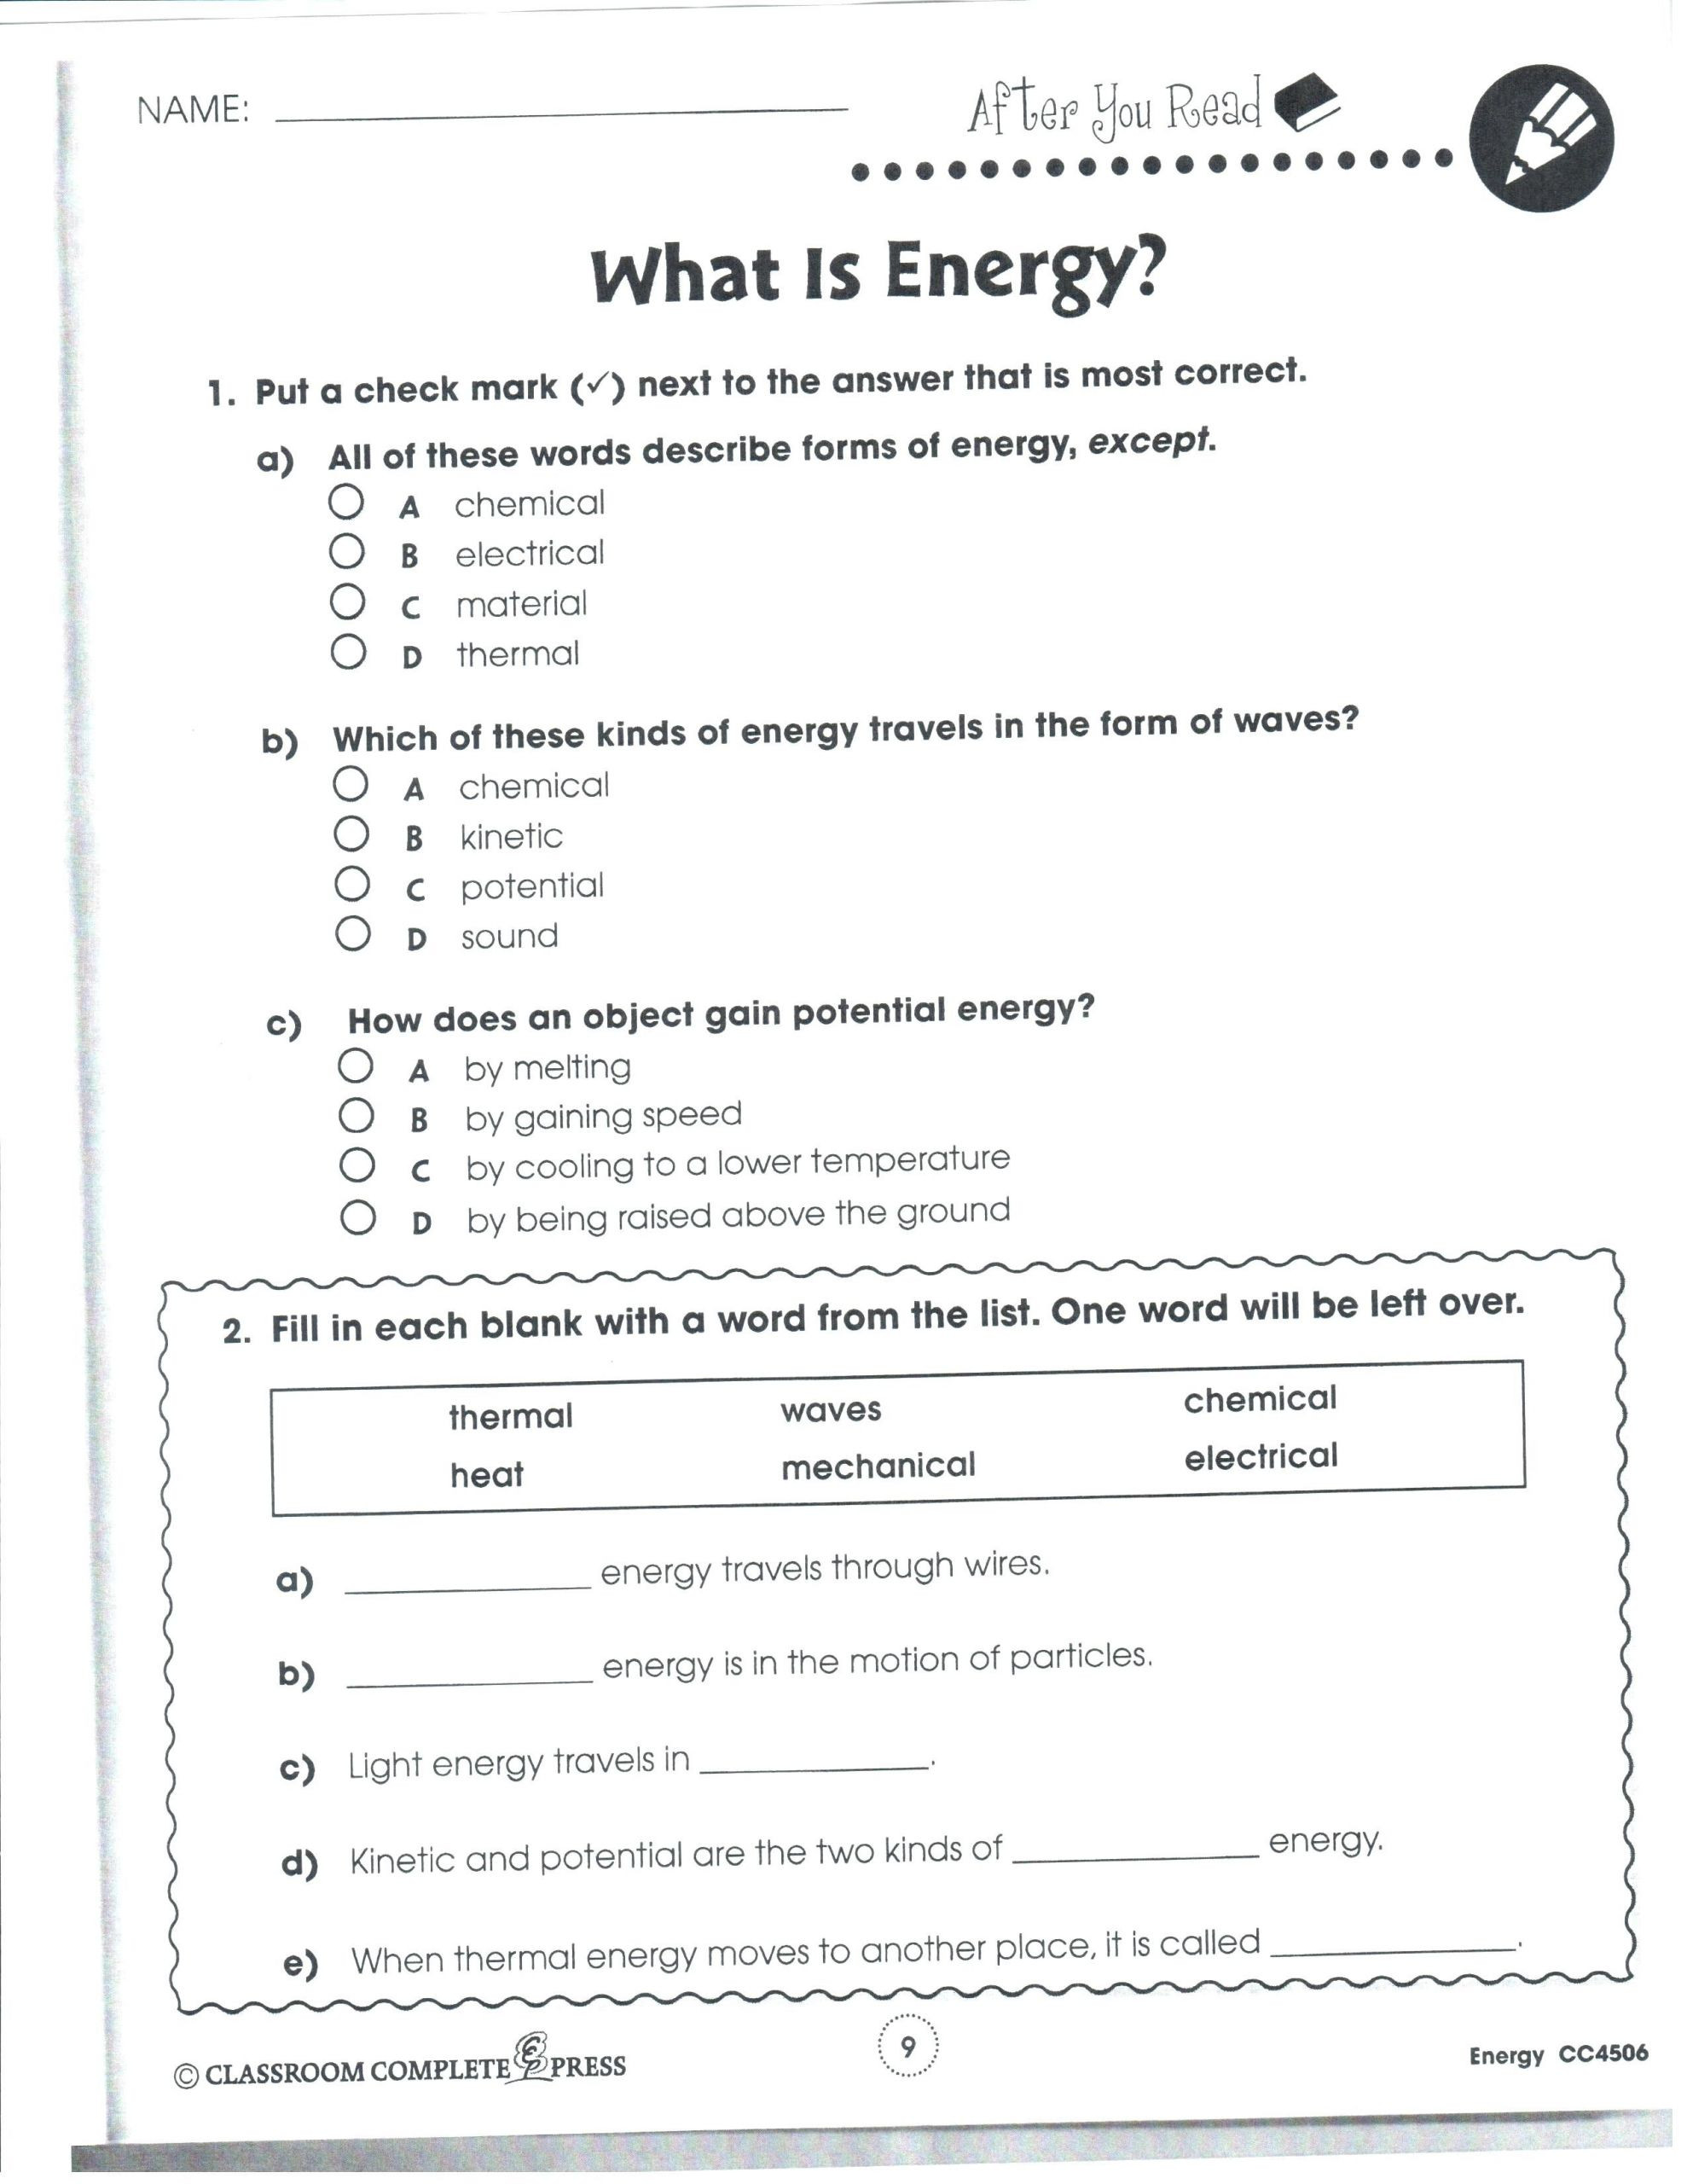 5th Grade Science Practice Worksheets 3 9th Grade Vocabulary Worksheets Worksheets